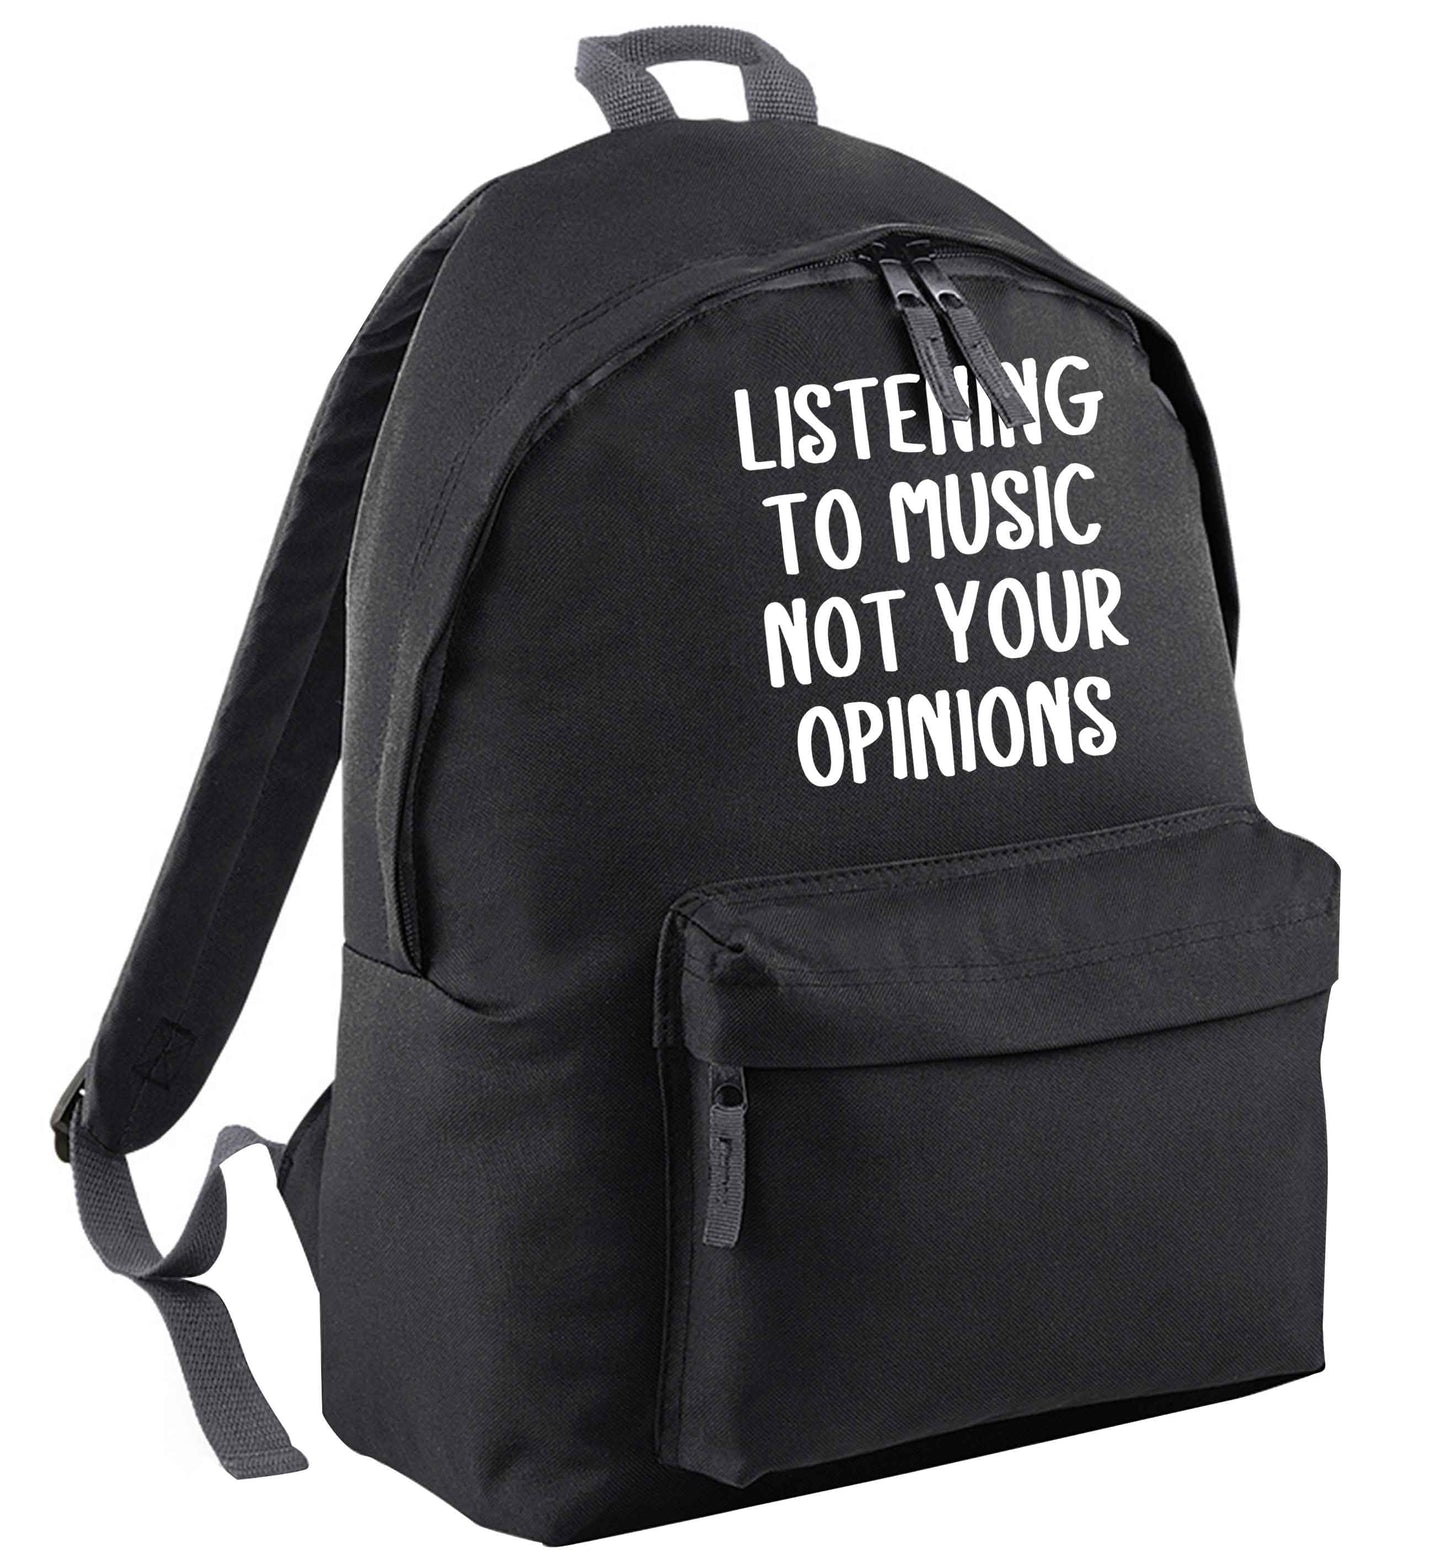 Listening to music not your opinions black adults backpack